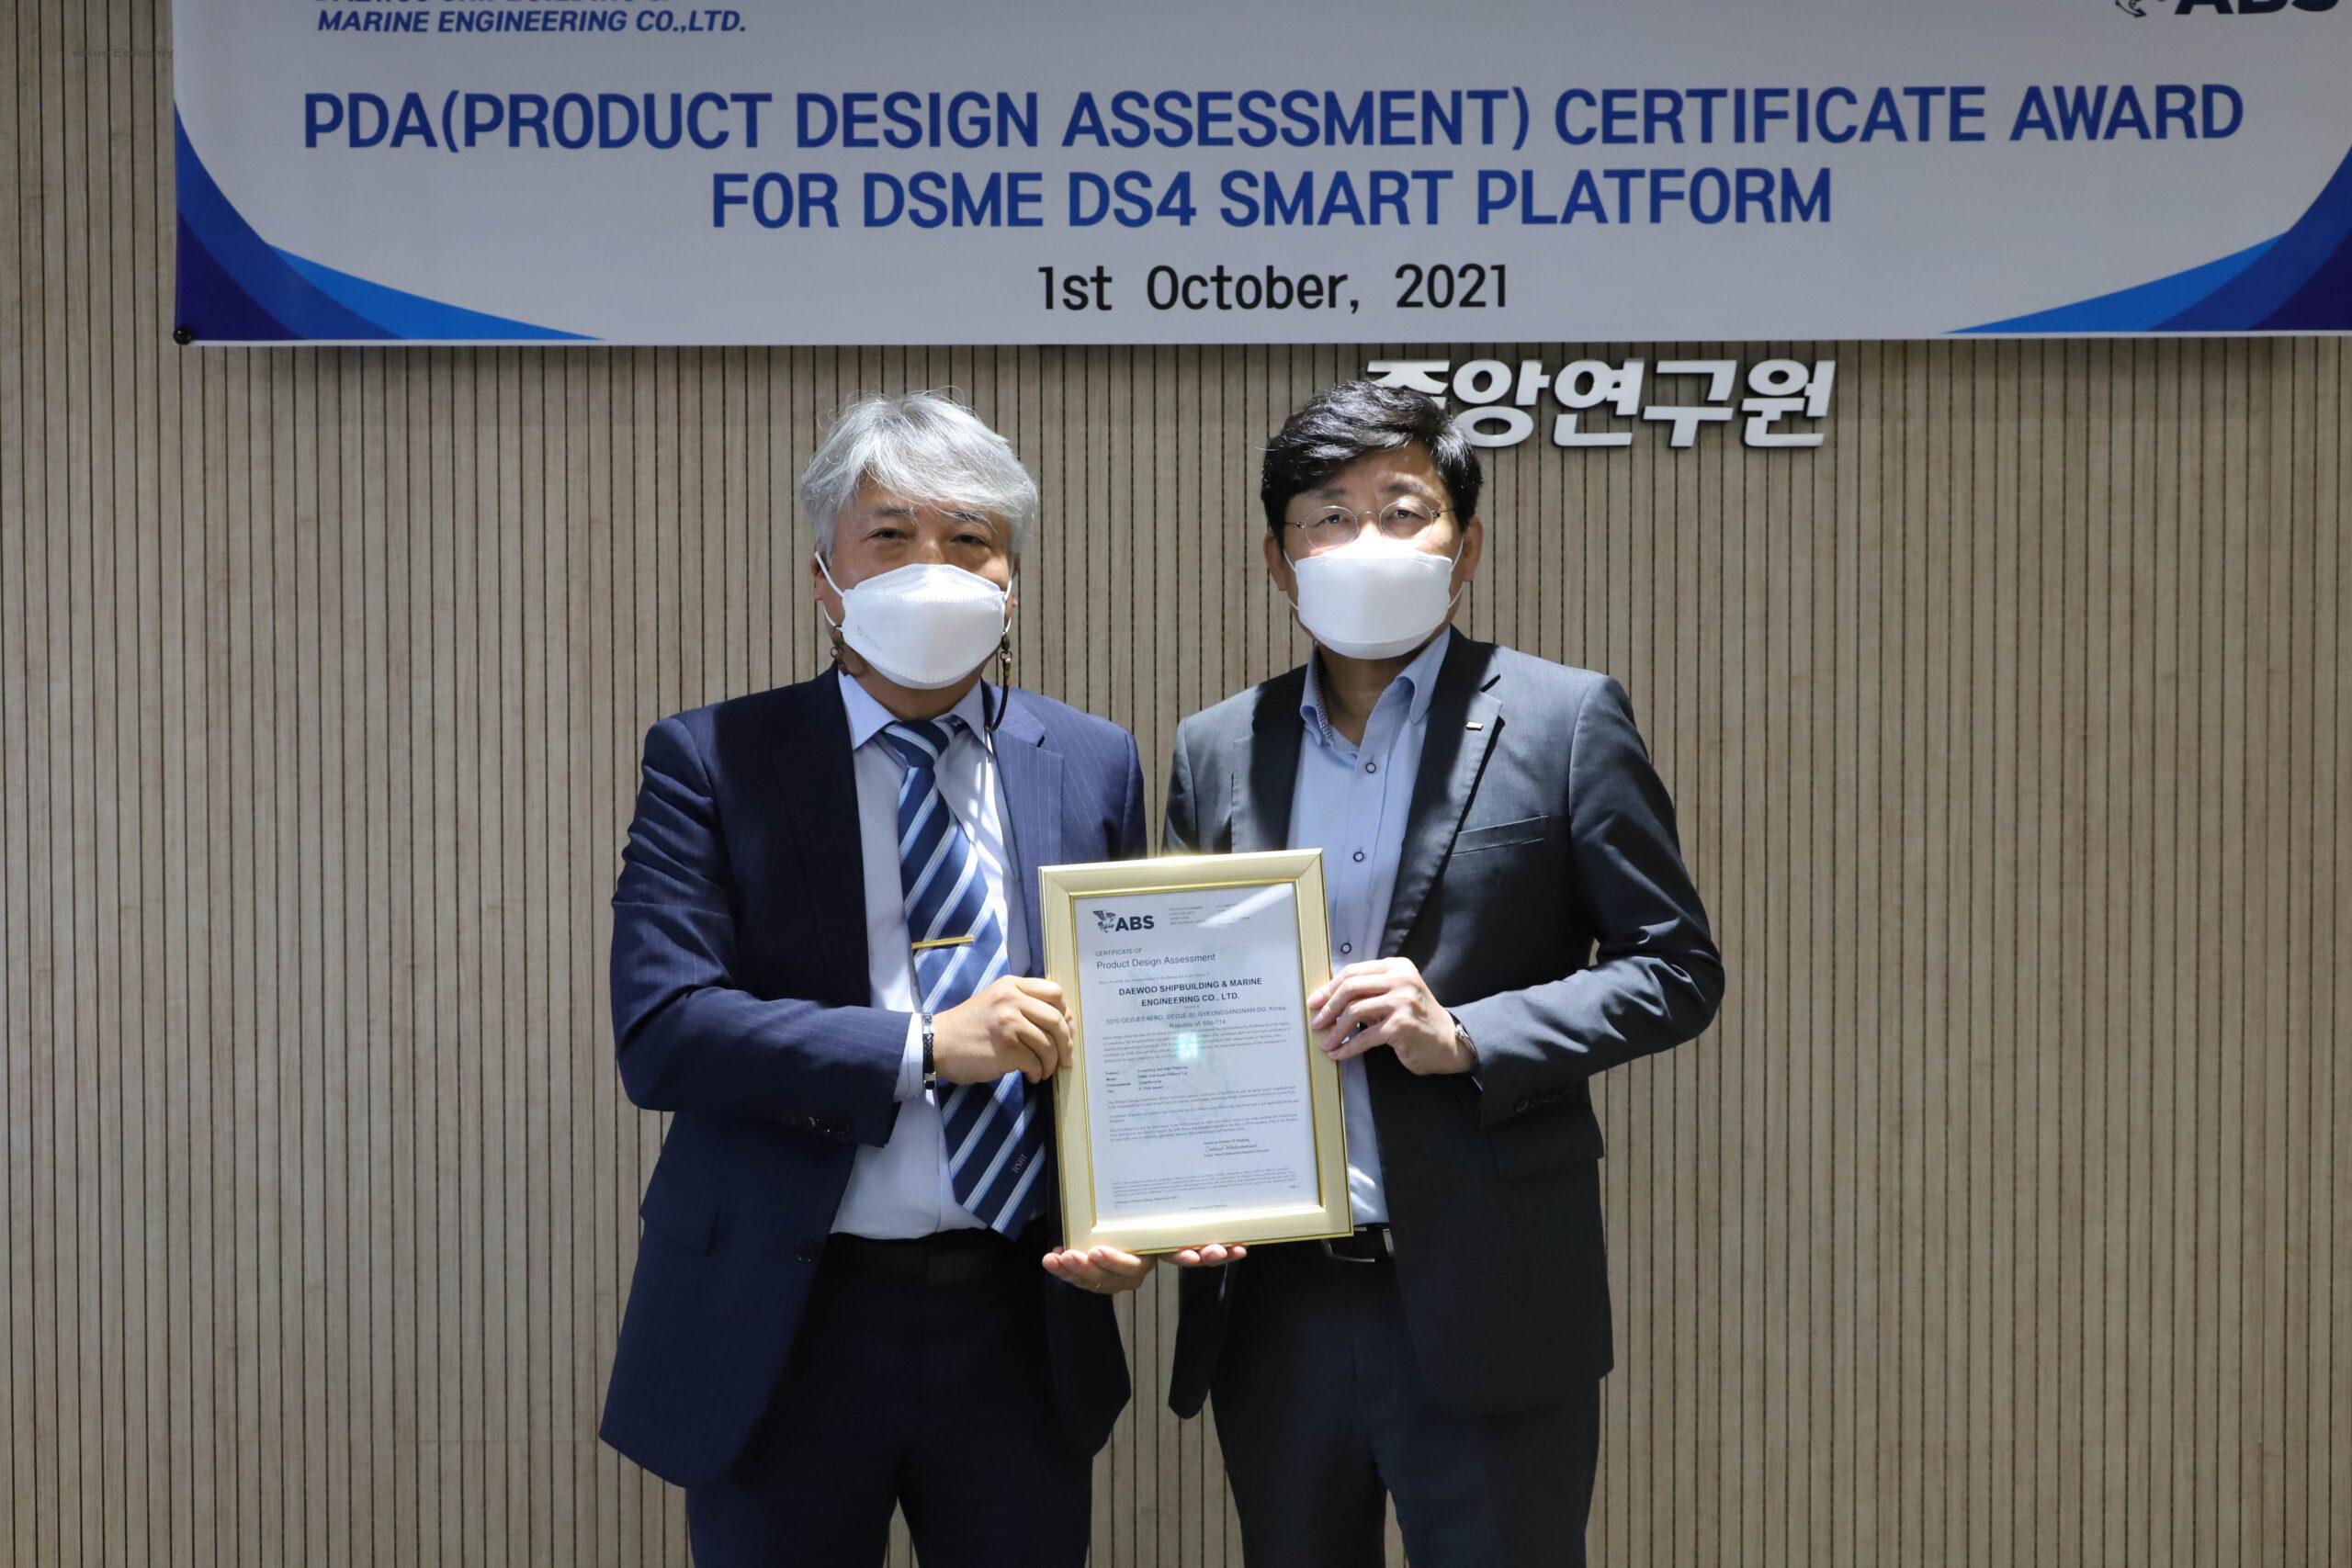 eBlue_economy_ABS Awards DSME CyberSafety® Product Design Assessment